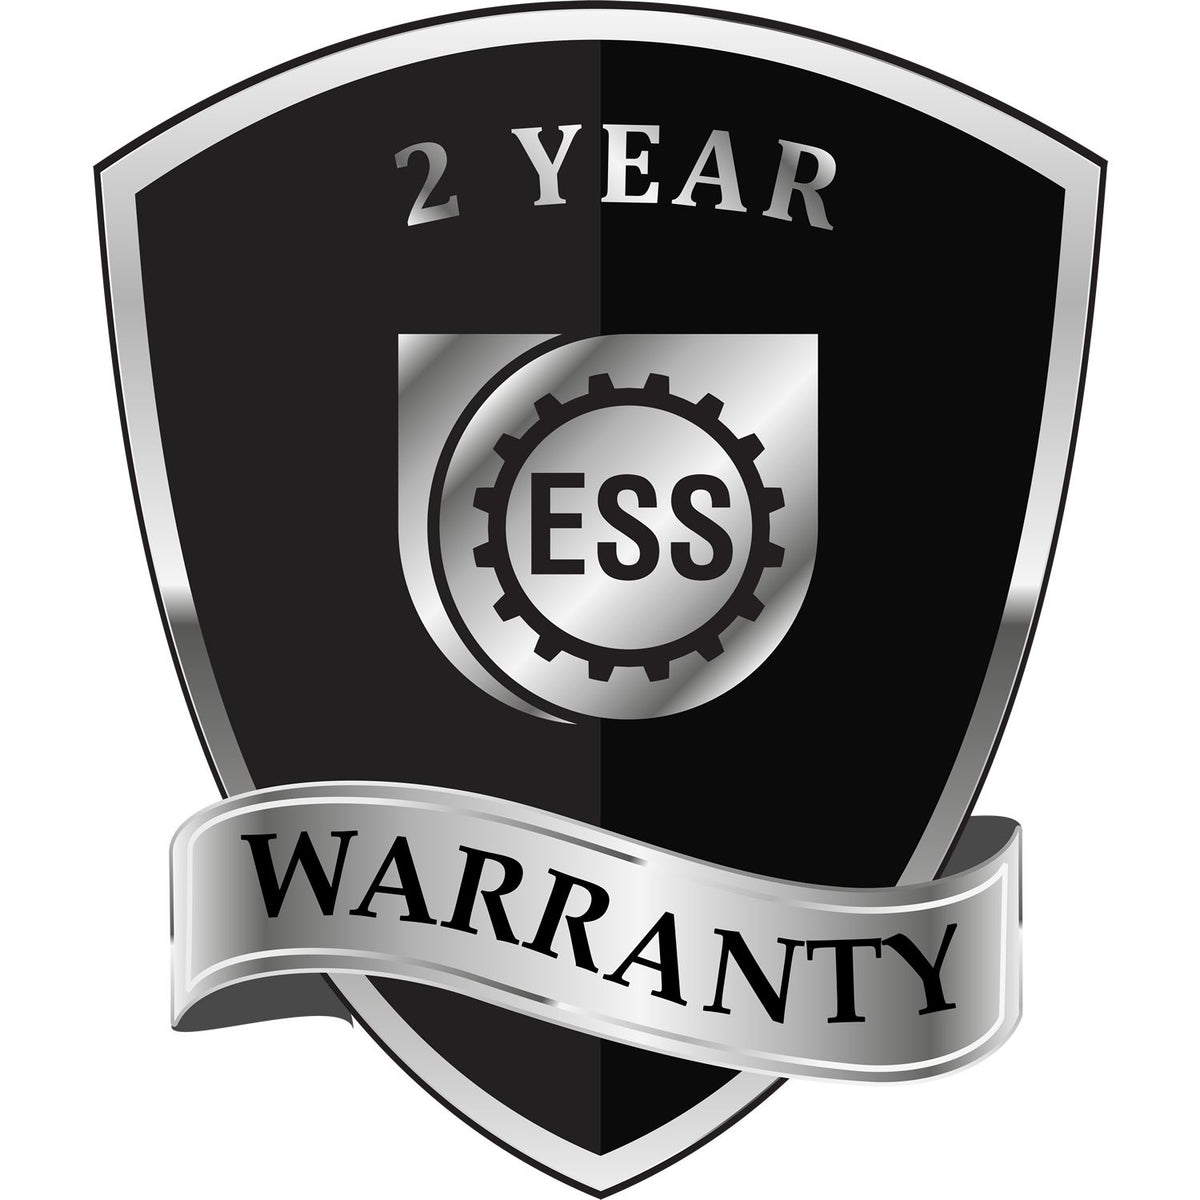 A black and silver badge or emblem showing warranty information for the Hybrid Nevada Engineer Seal